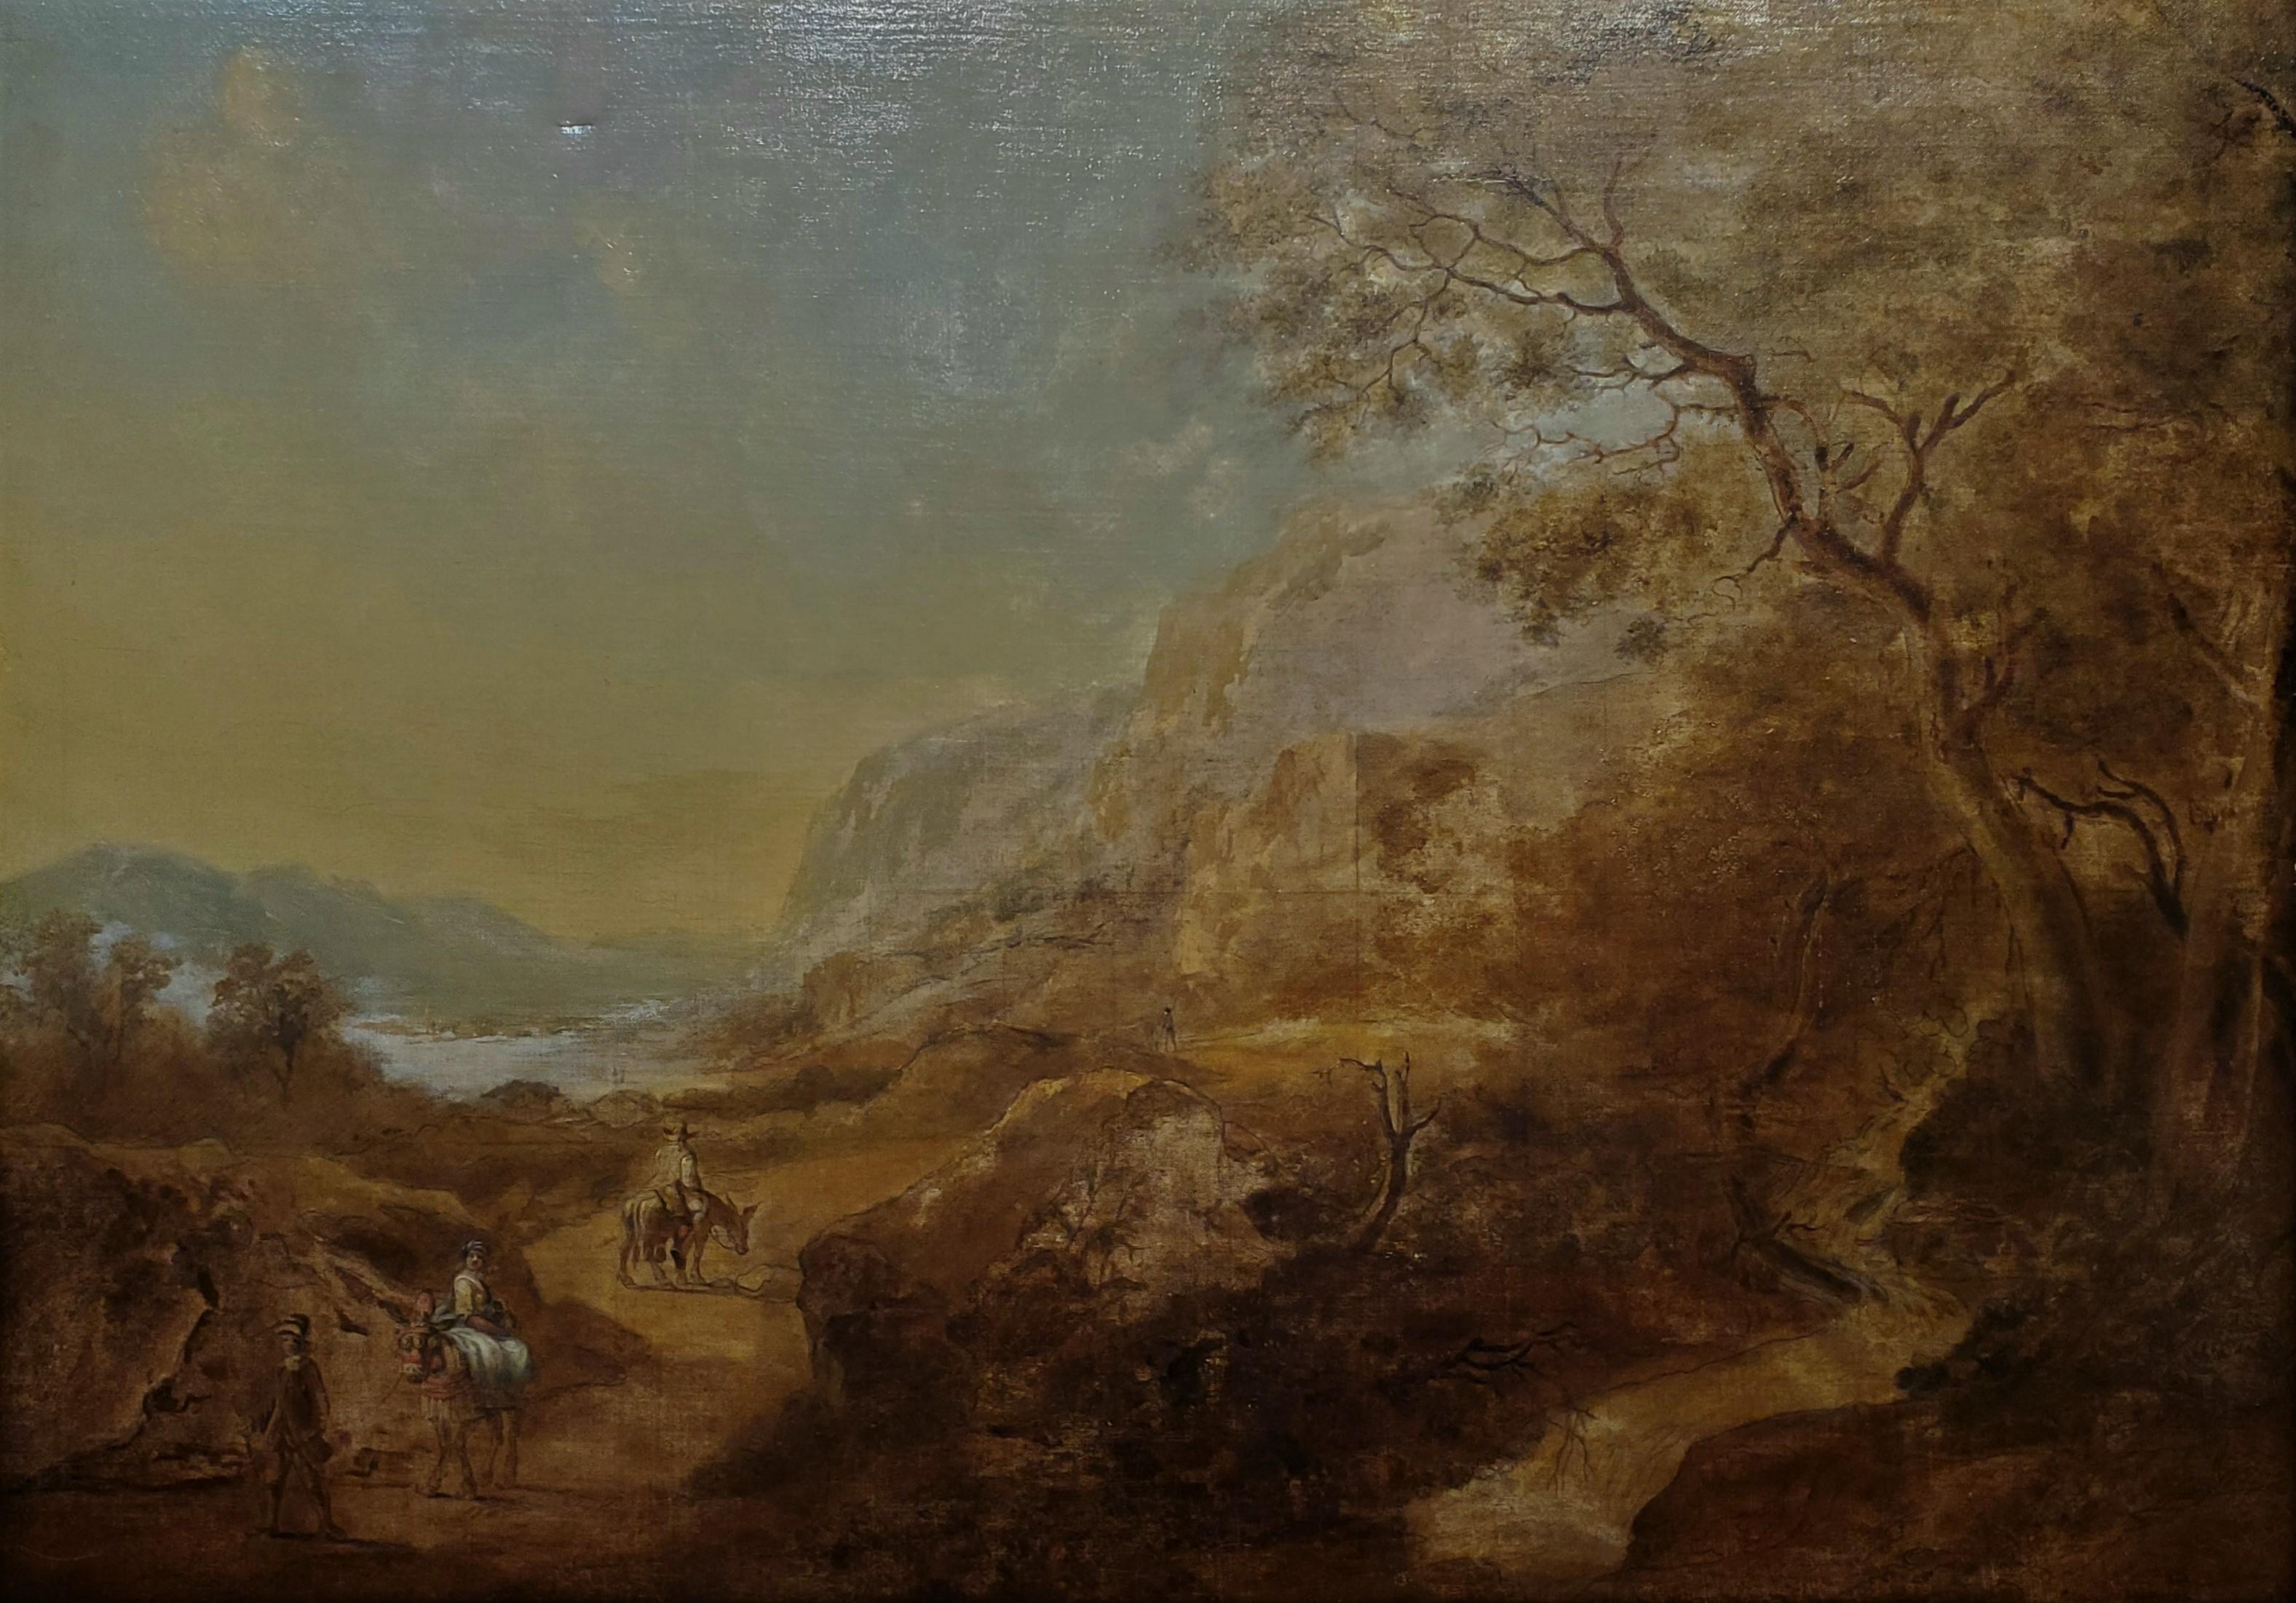 (After) Jan Both Landscape Painting - Old Master Landscape by a Follower of Jan Both